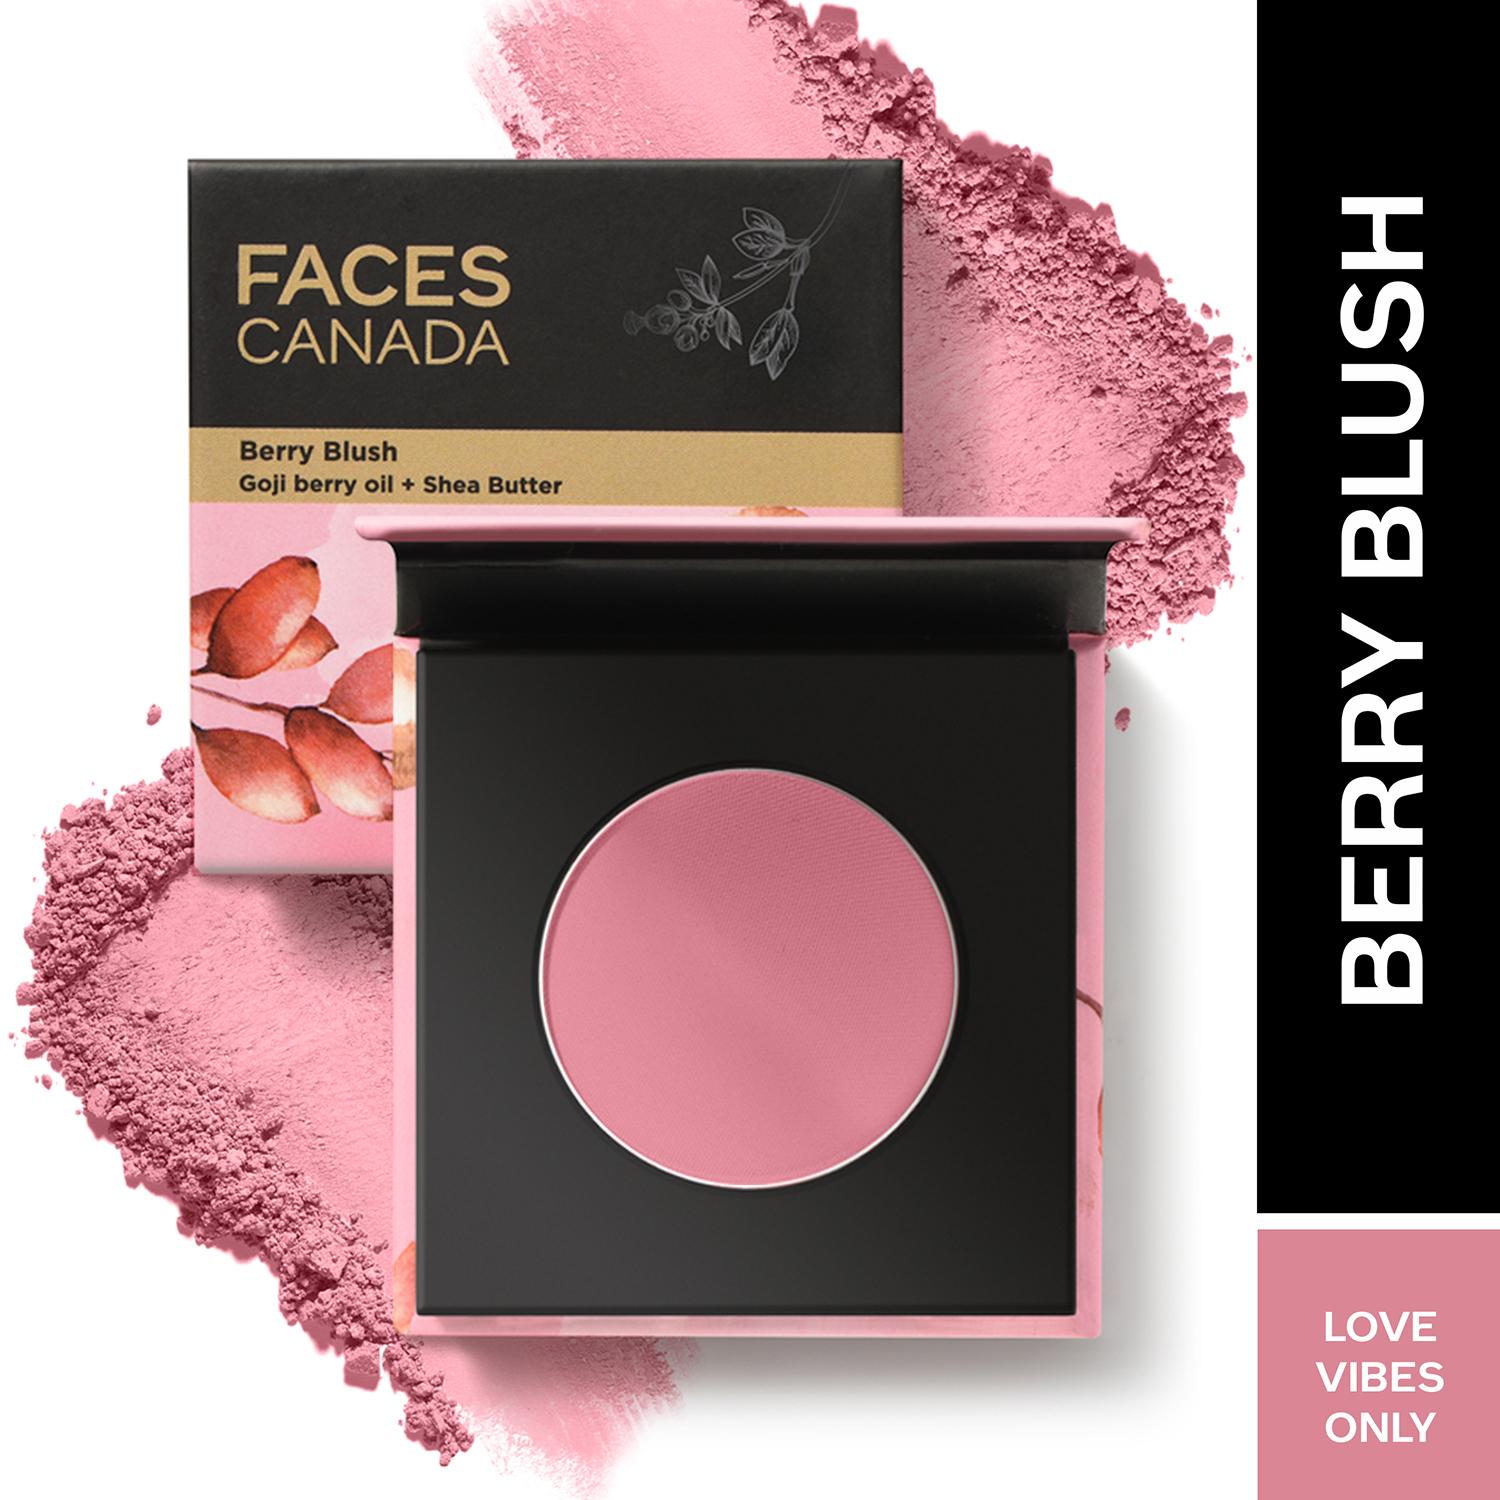 Faces Canada | Faces Canada Berry Blush - Love Vibes Only 03, Lightweight Long Lasting Ultra-Matte HD Finish (4 g)